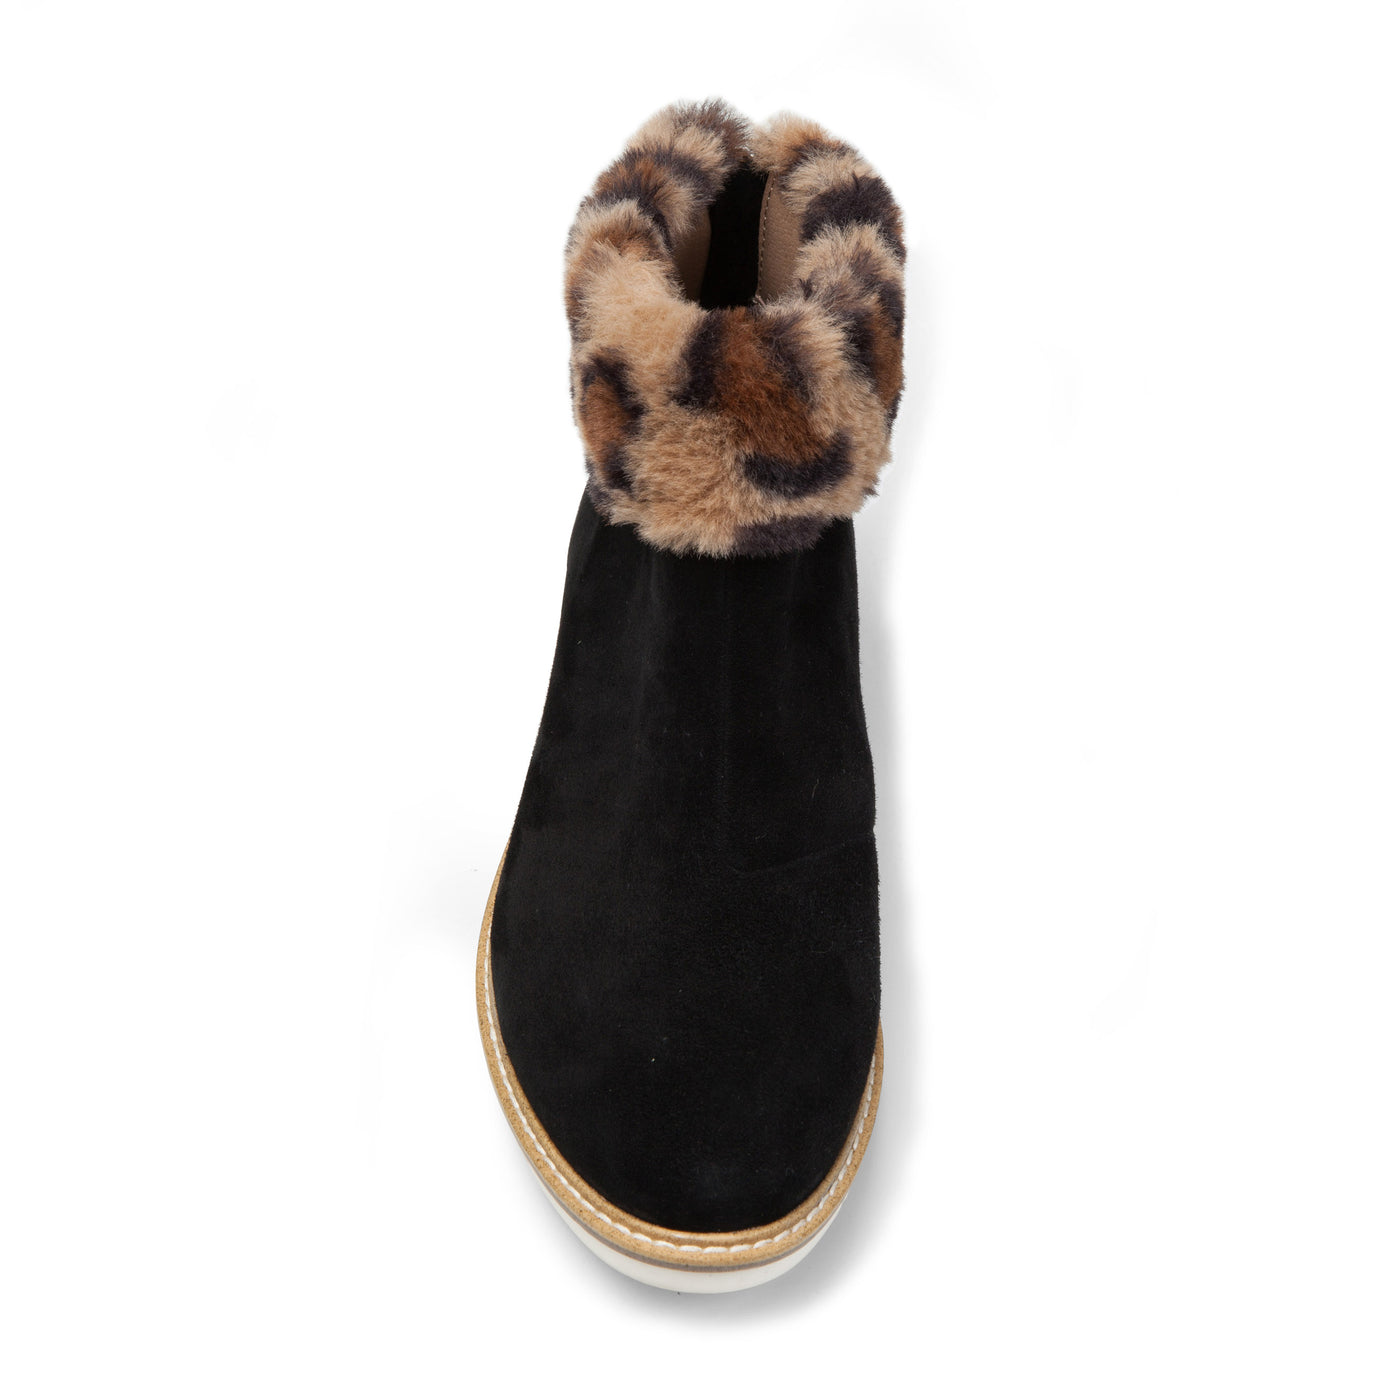 Artic Shearling Bootie